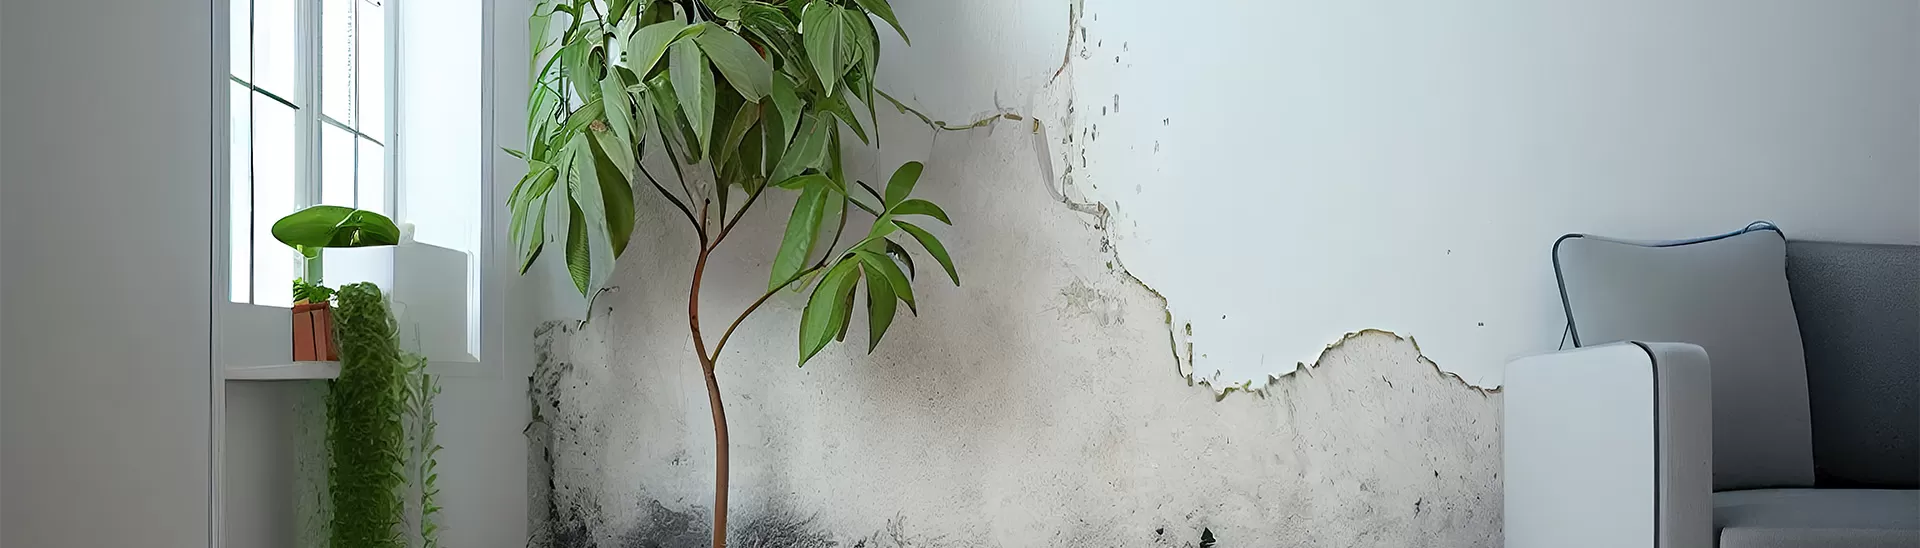 How to Prevent and Repair Water Leakage in Walls?